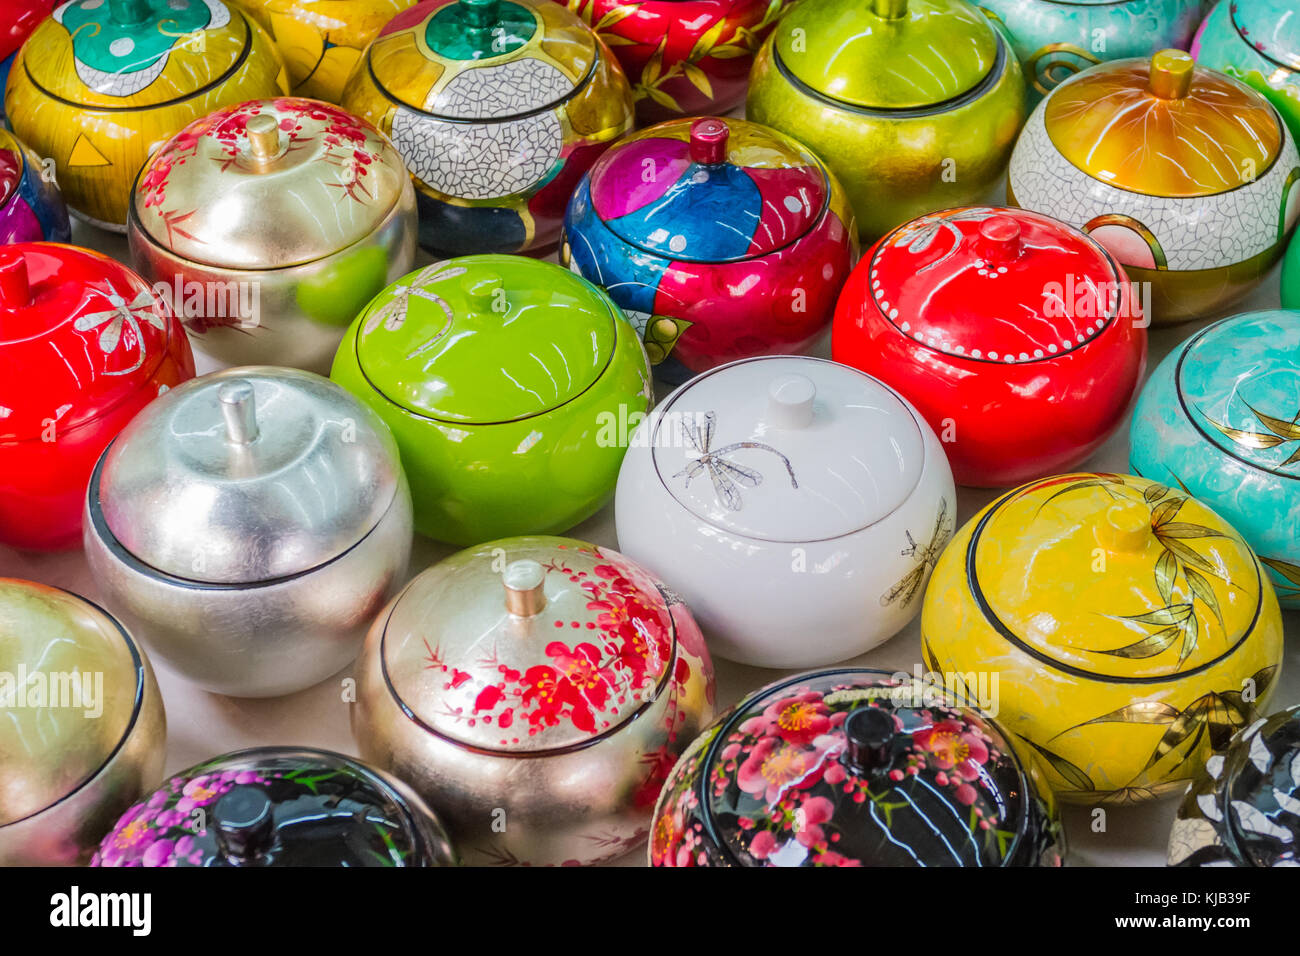 Bowls with lids on sale in Chinatown Singapore. Stock Photo